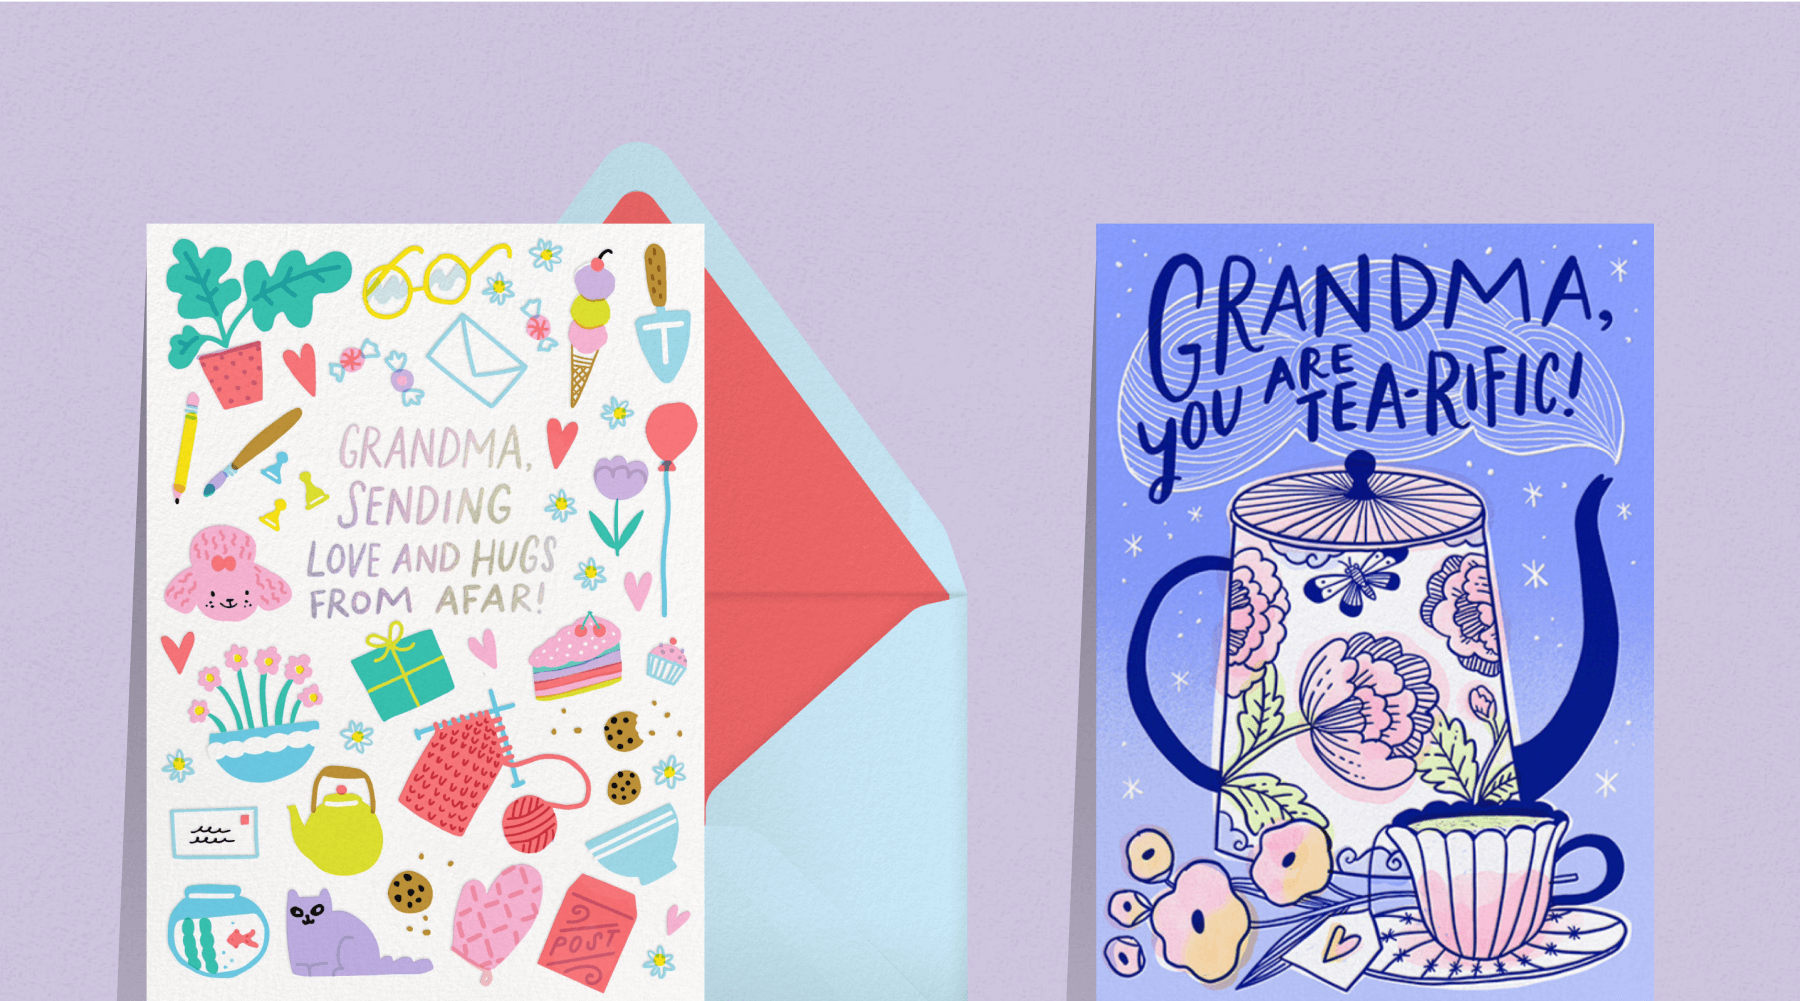 A card with lots of colorful illustrations of cats, dogs, knitting needles, plants, desserts, etc; a card reads ‘grandma, you are tea-rific!’ with a floral tea pot and cup.